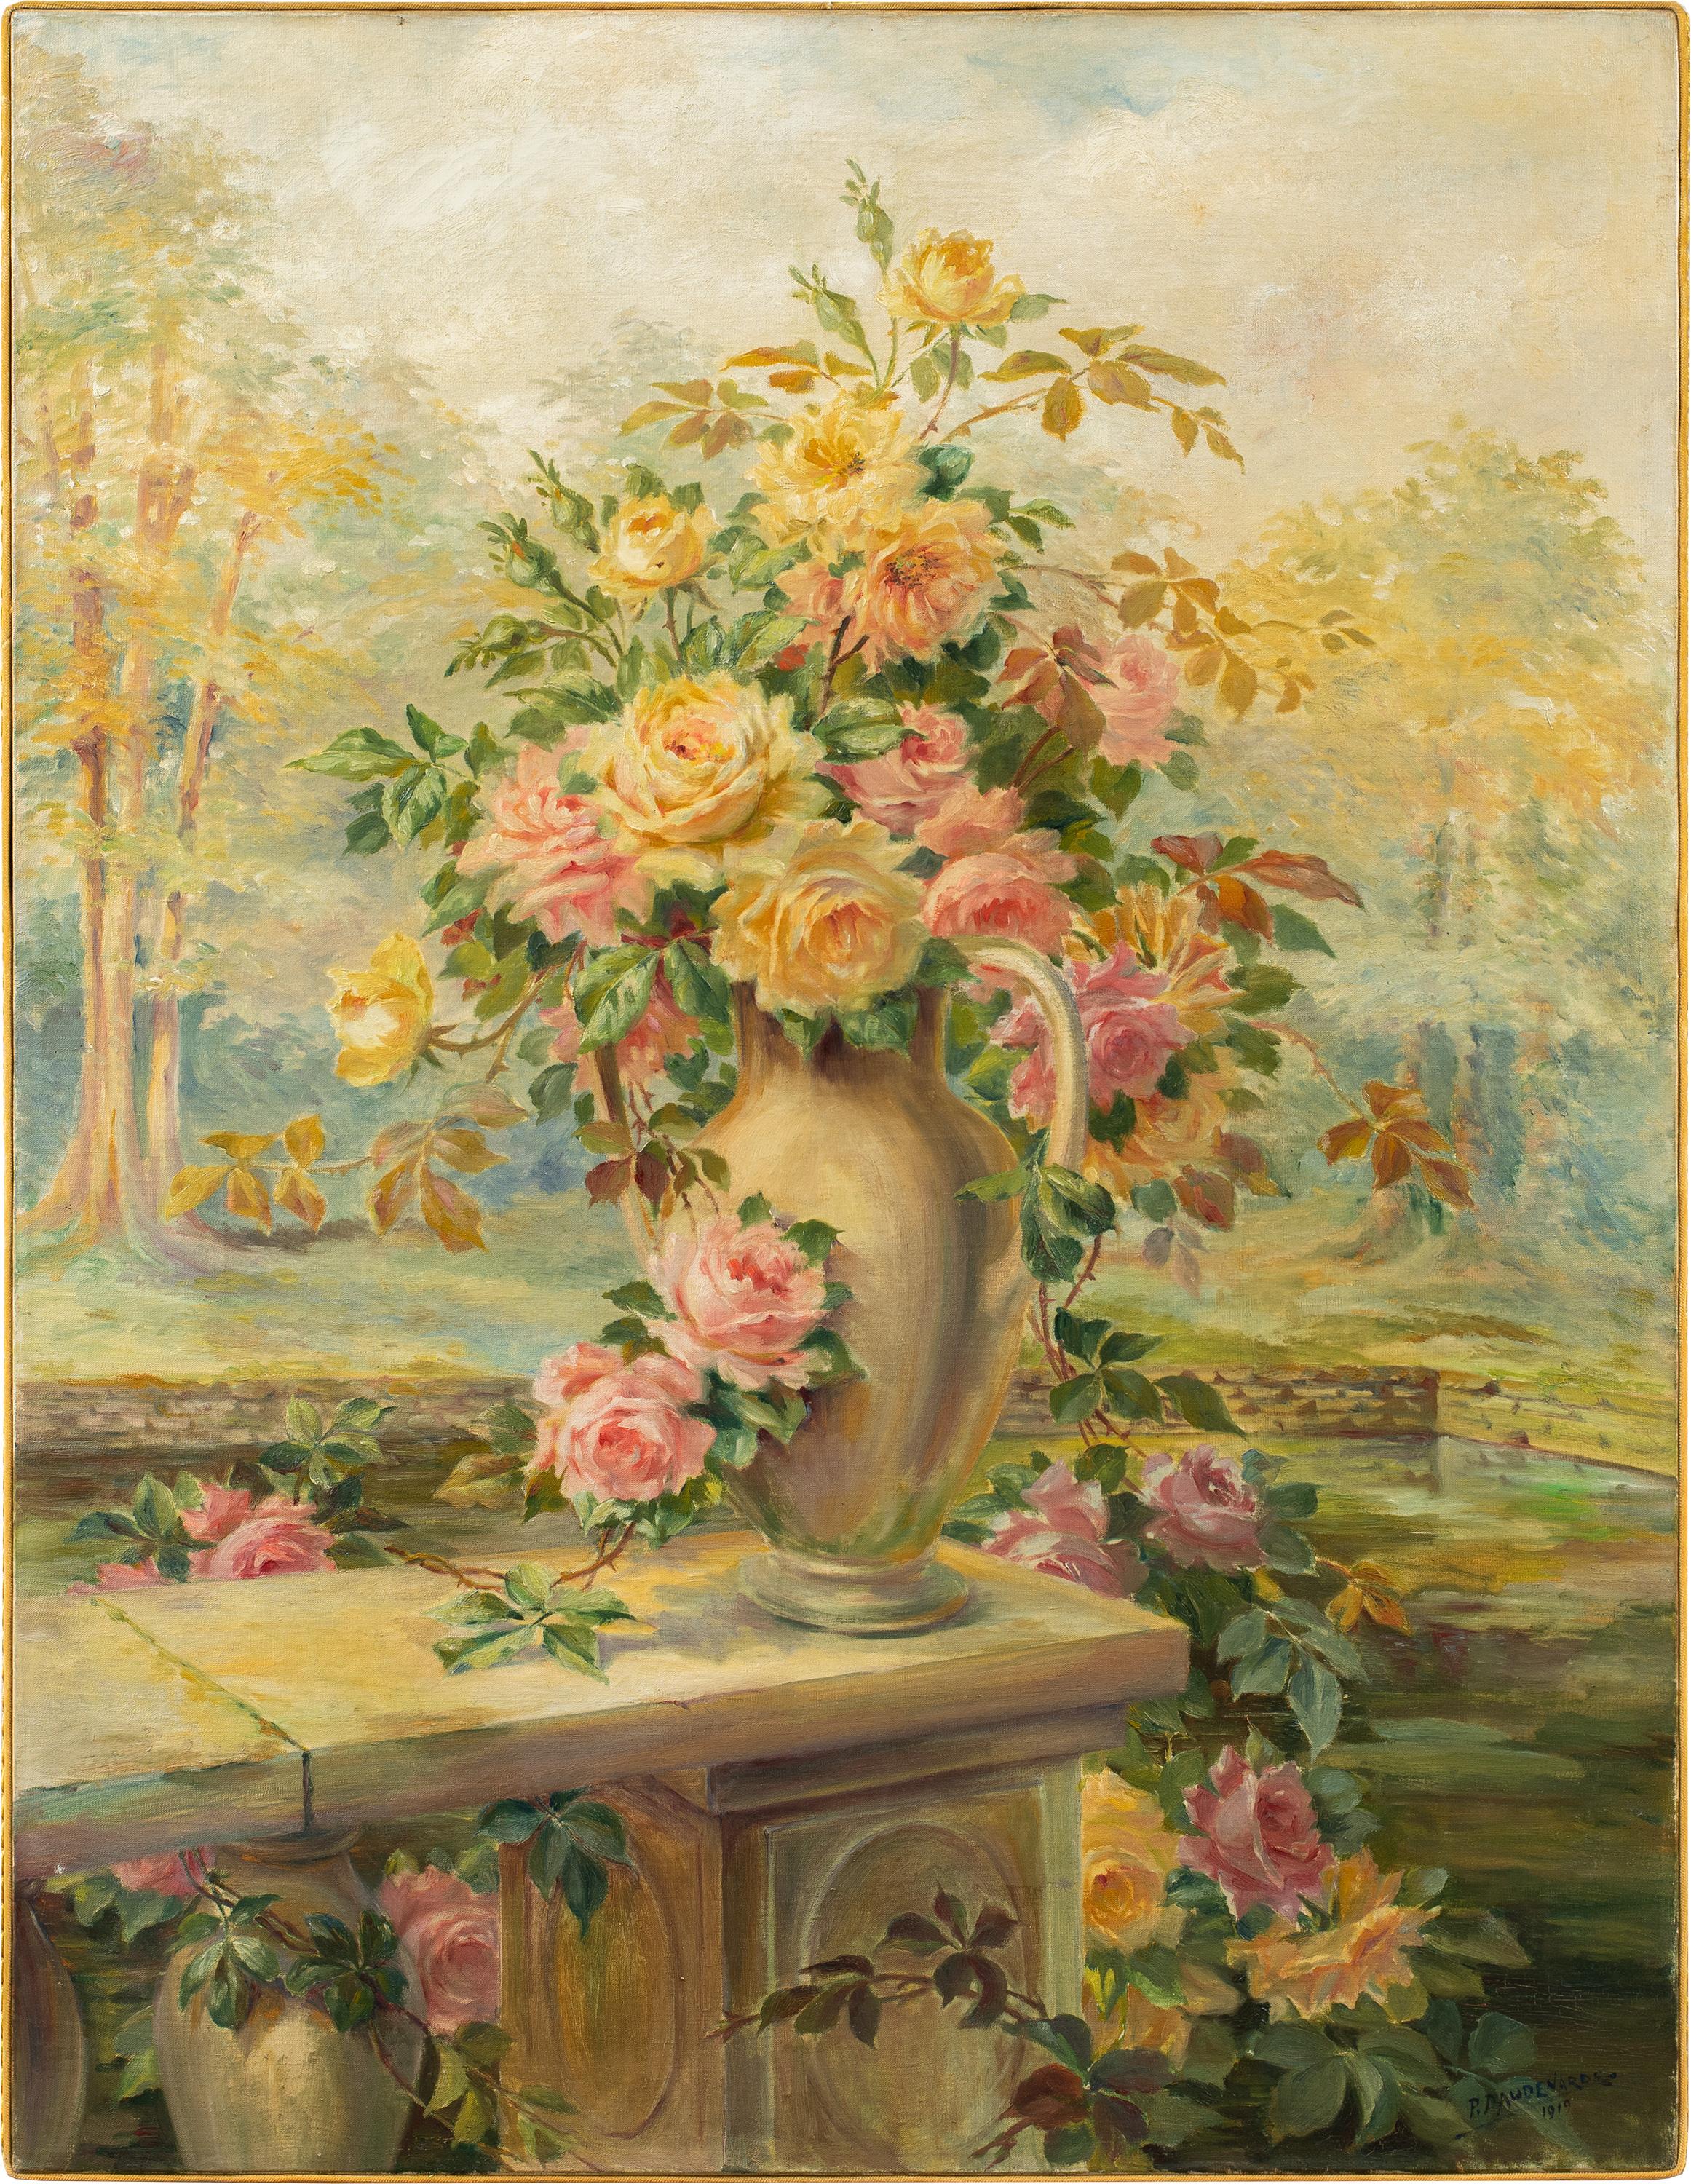 Unknown Figurative Painting - Naturalistic Italian painter - 19/20th still life painting - Flowers - Oil on ca